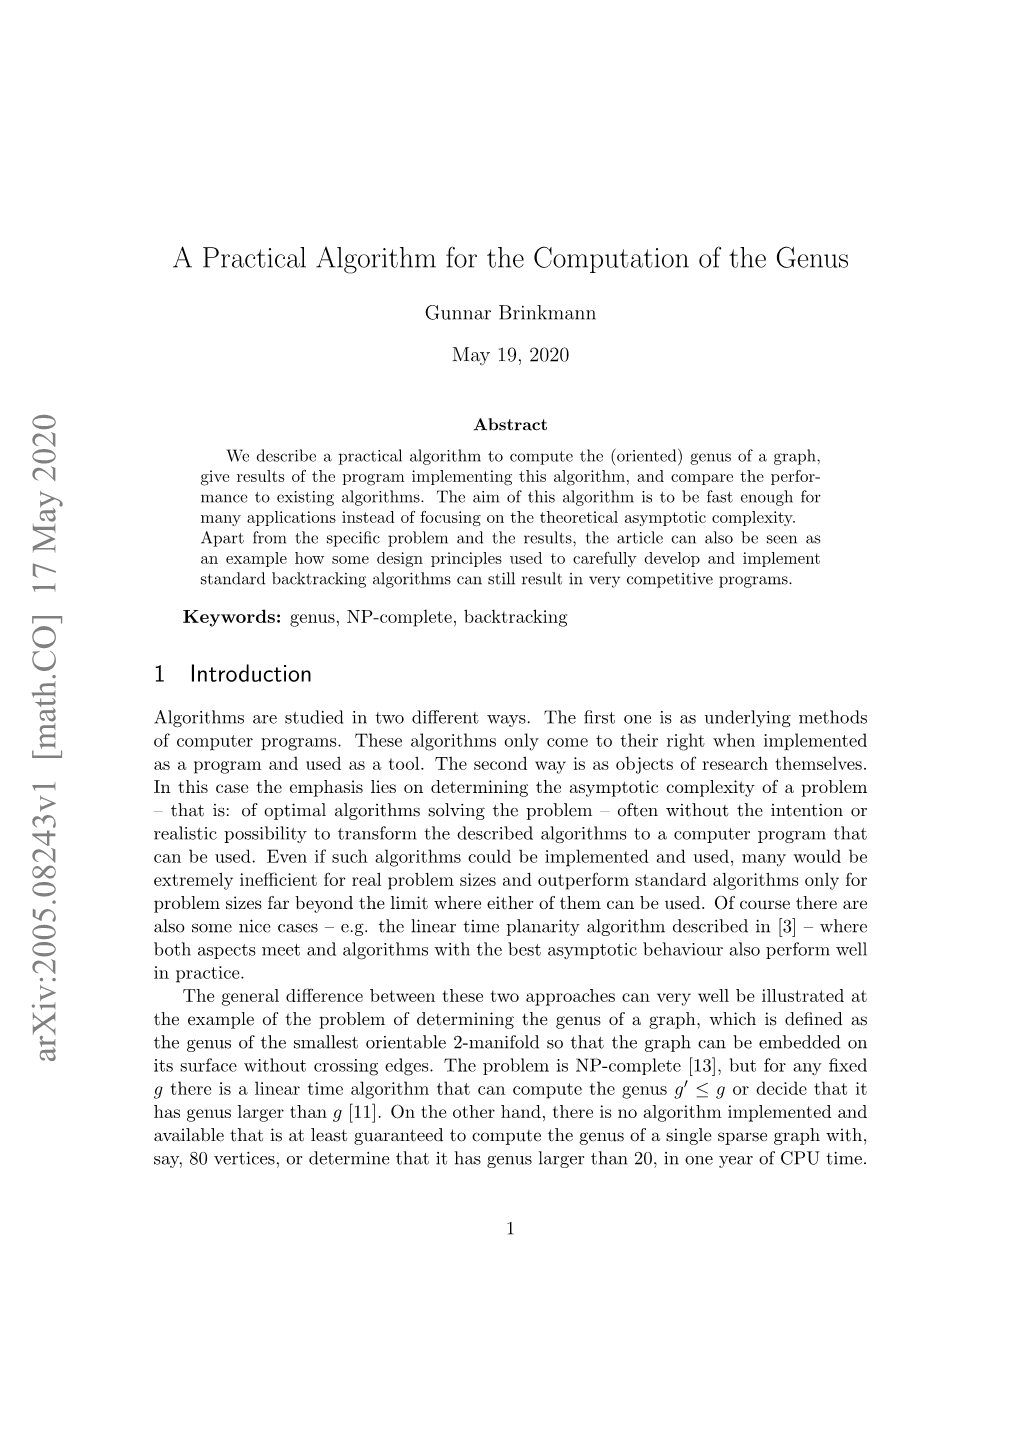 A Practical Algorithm for the Computation of the Genus